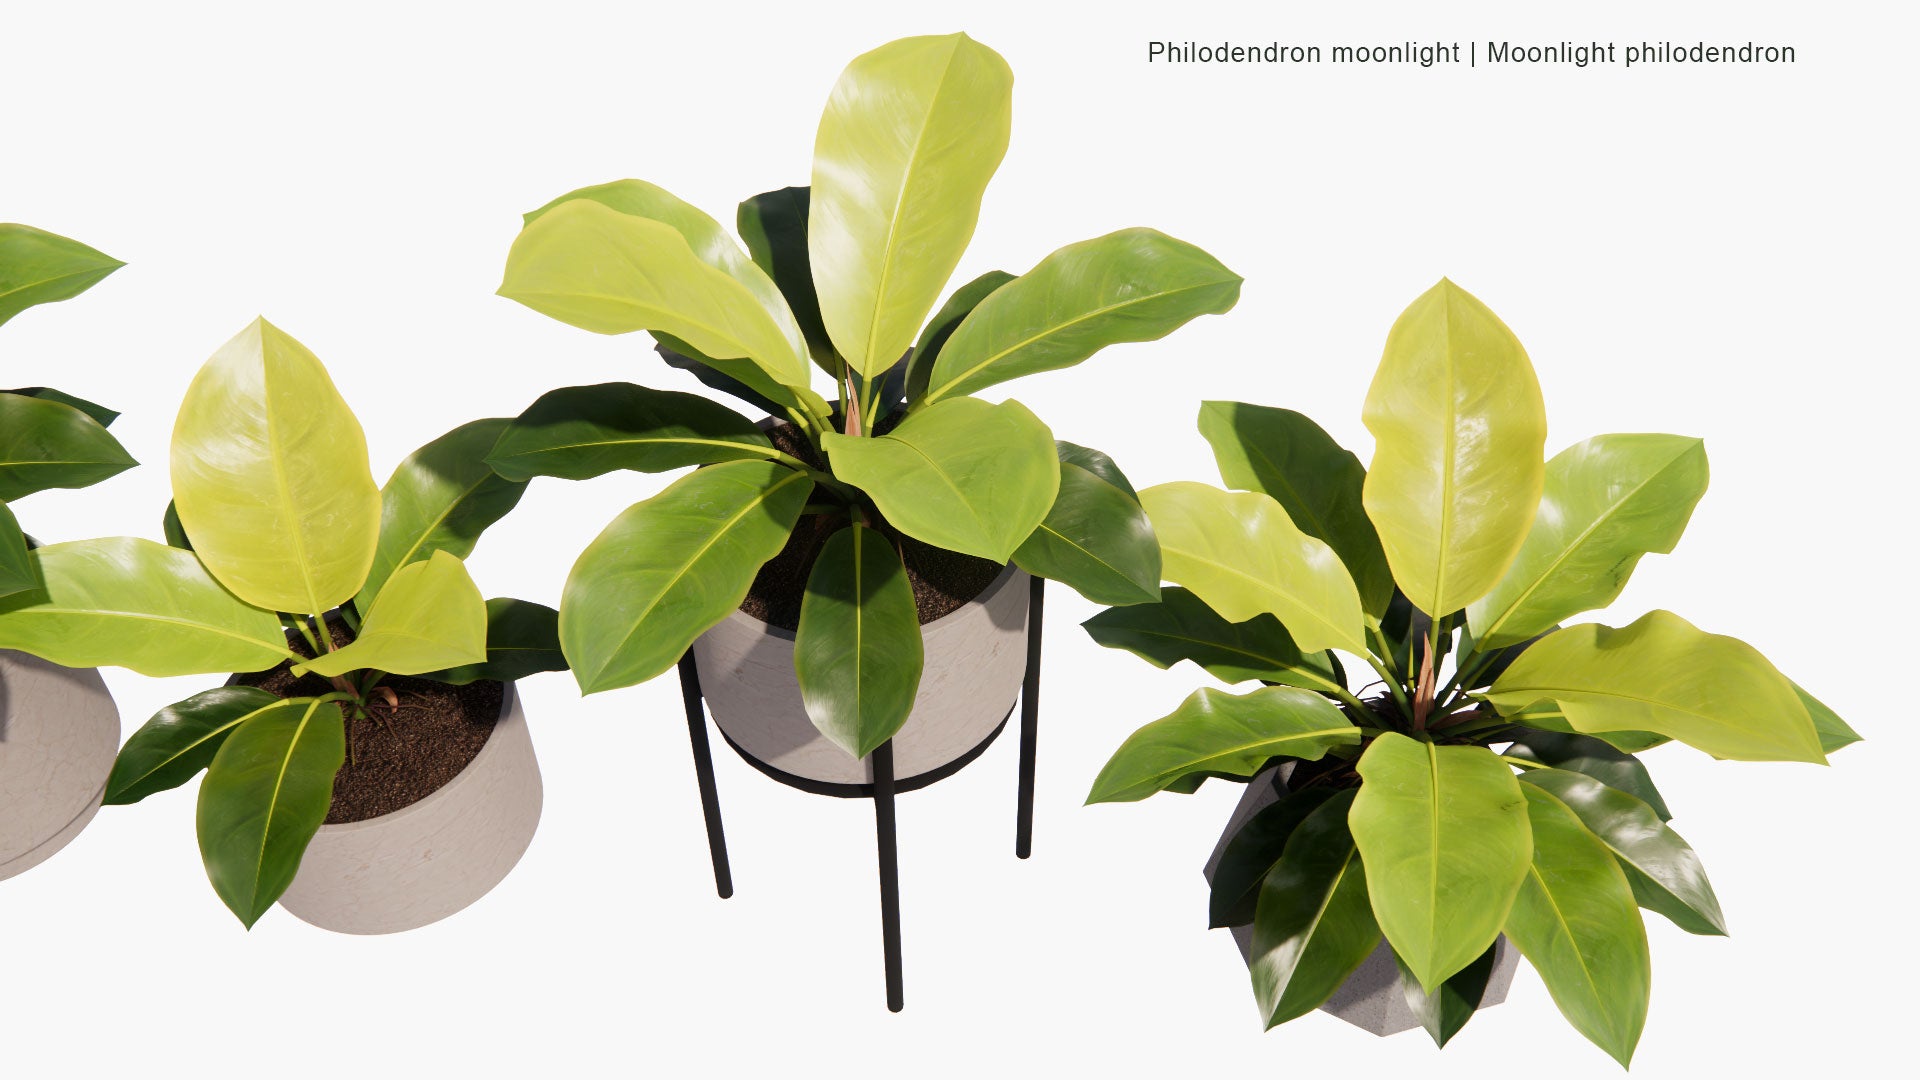 Low Poly Philodendron Moonlight - Moonlight Philodendron (3D Model)